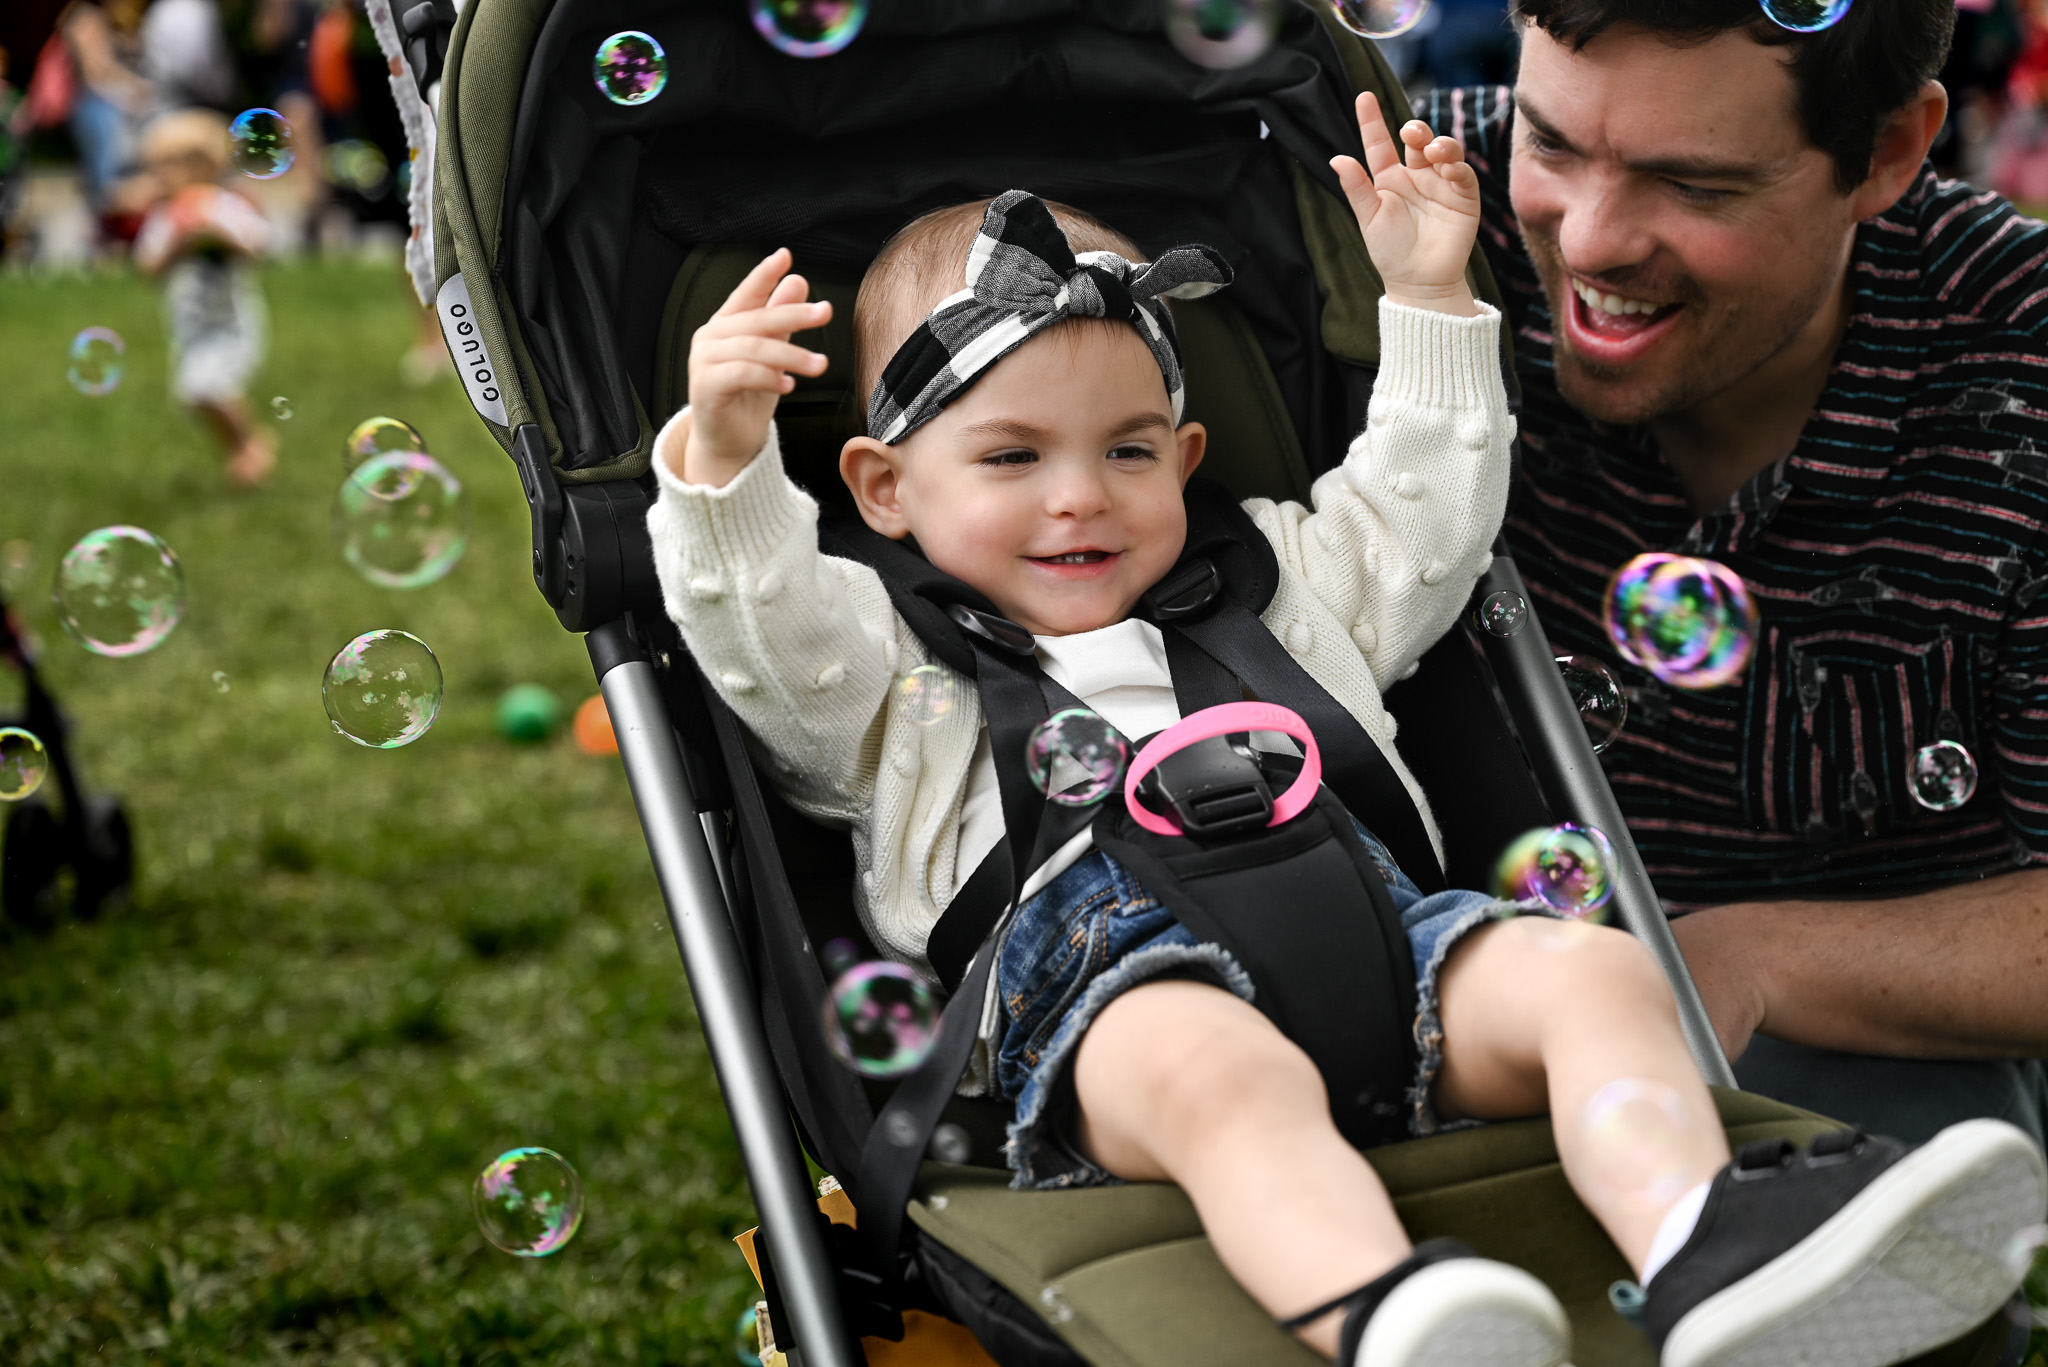 Little girl in a stroller catching bubbles